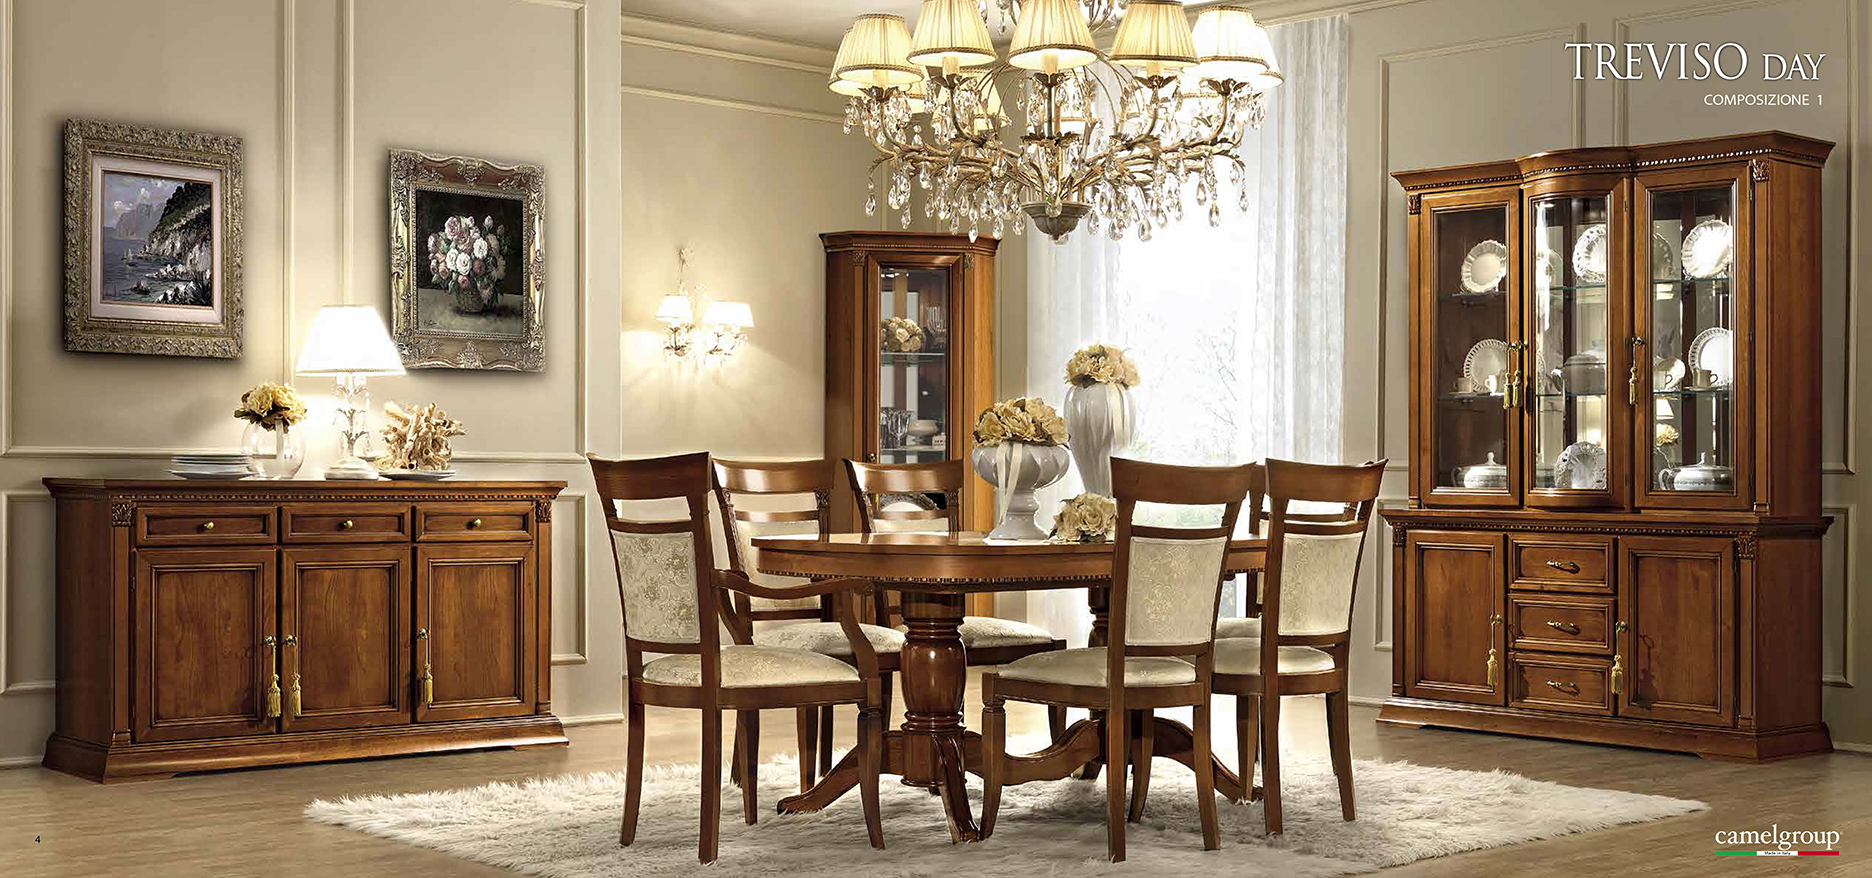 Clearance Dining Room Treviso Cherry Day